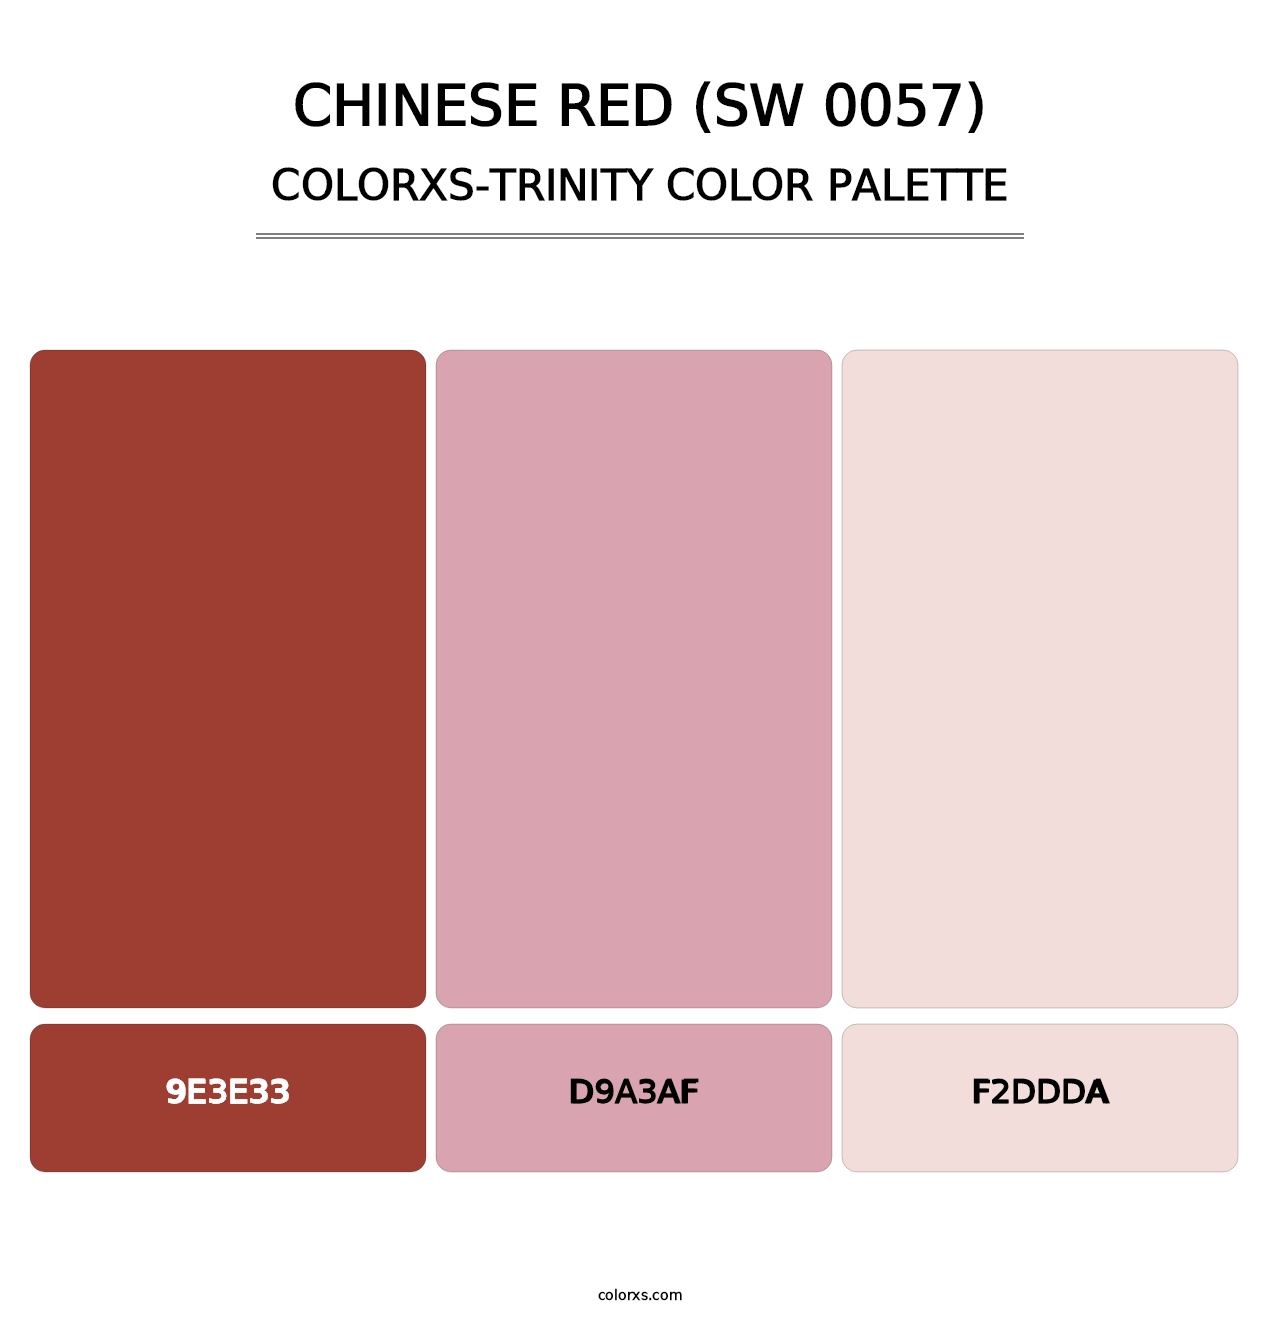 Chinese Red (SW 0057) - Colorxs Trinity Palette